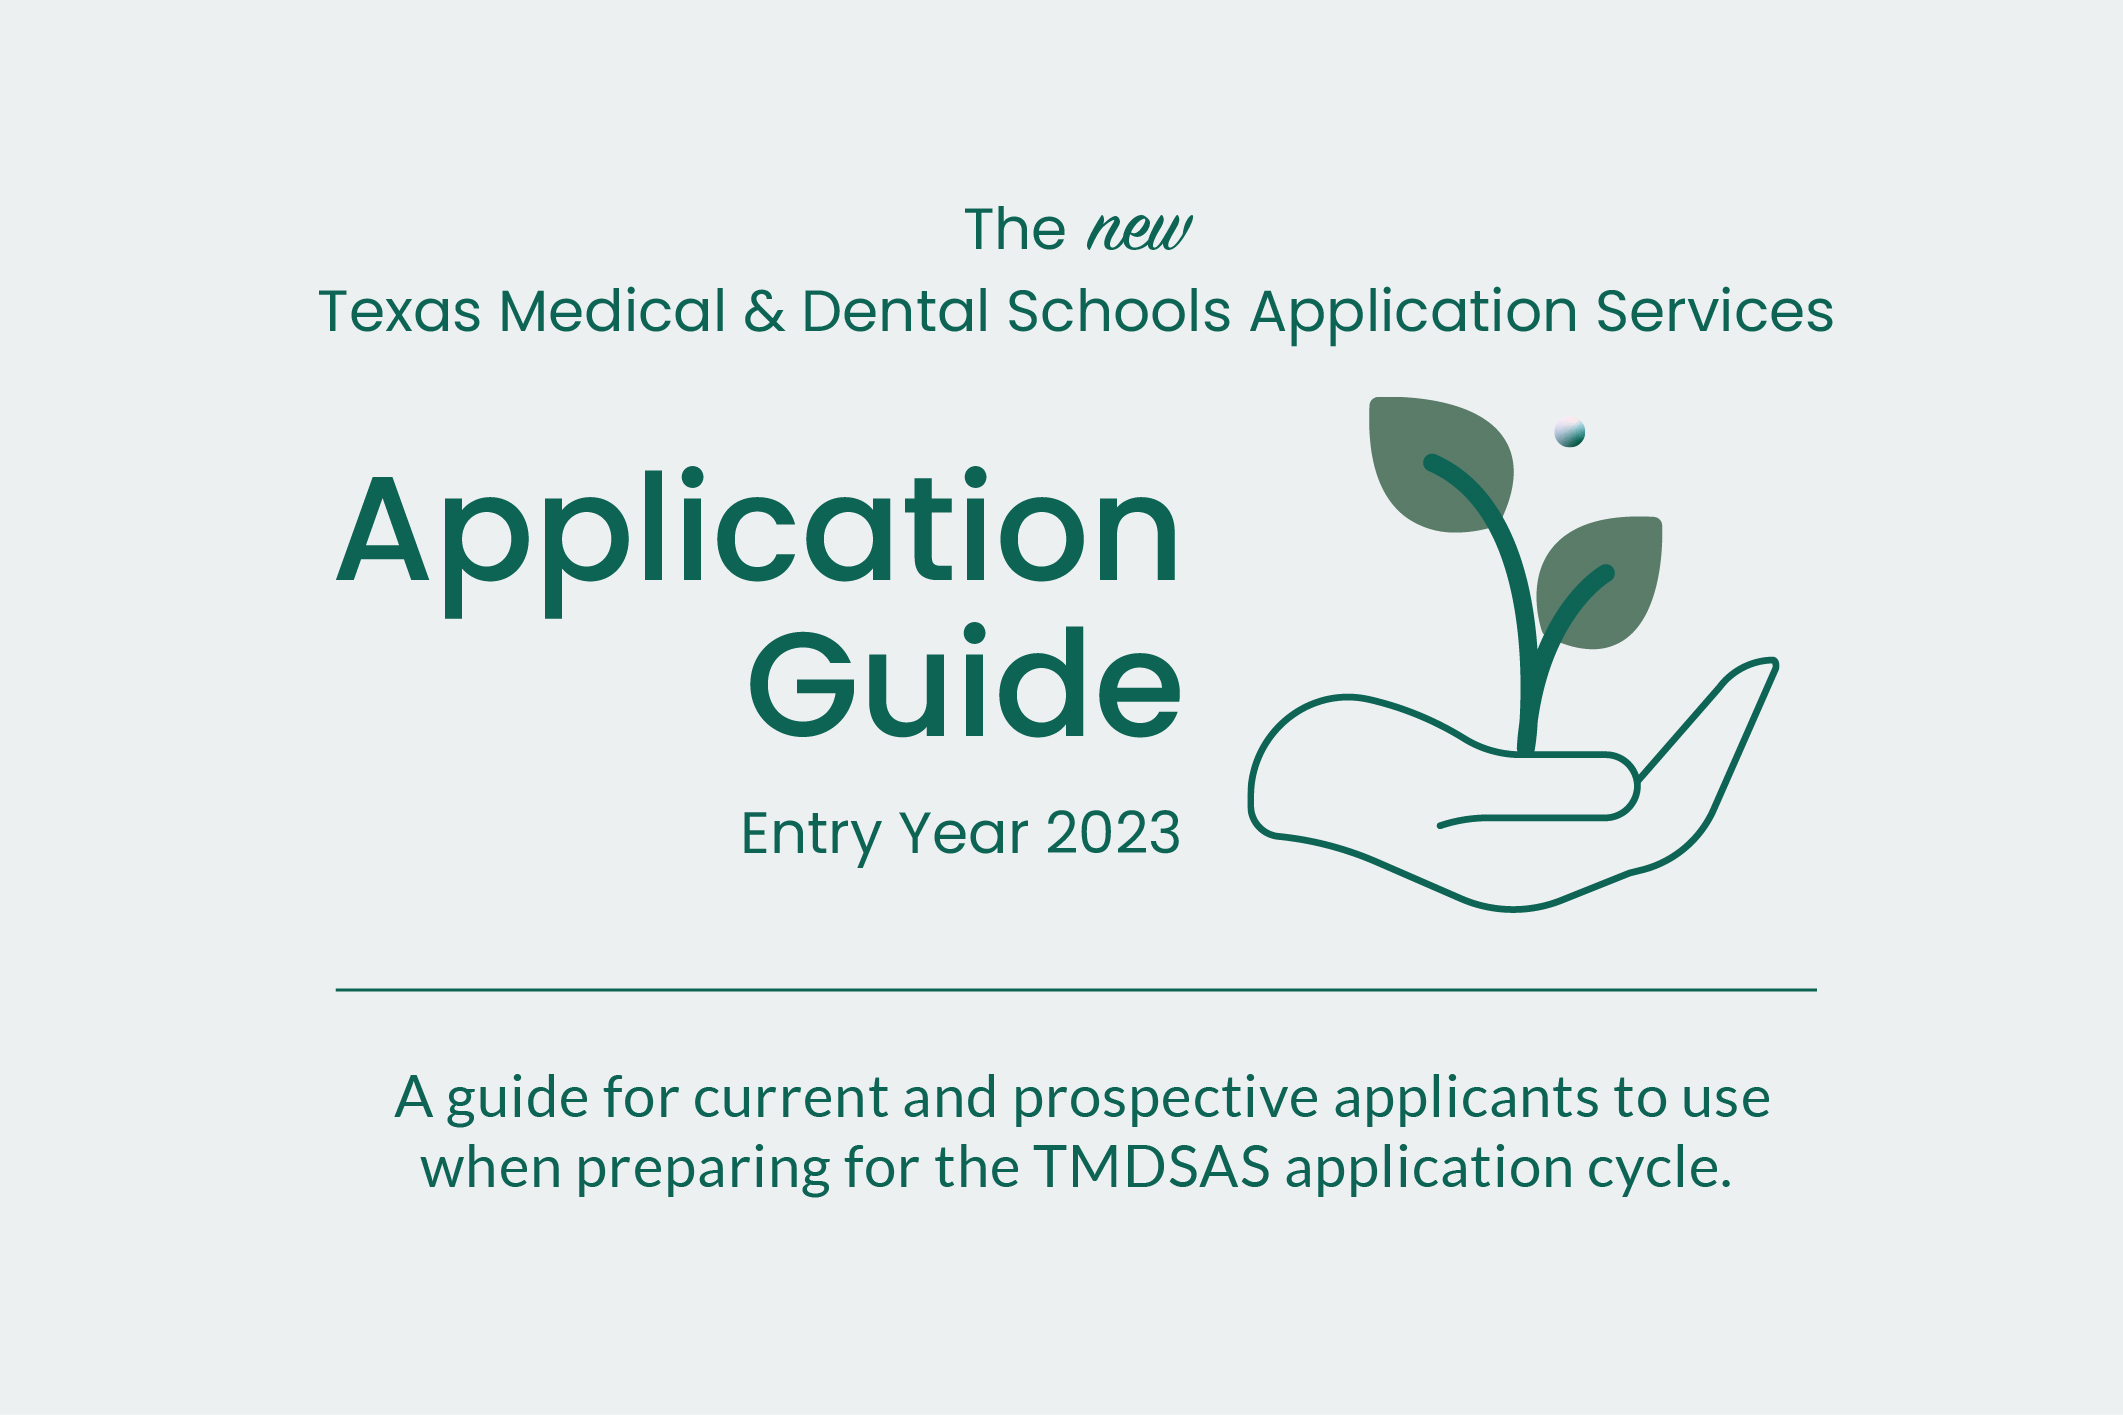 Access the Application Guide for Entry Year 2023!